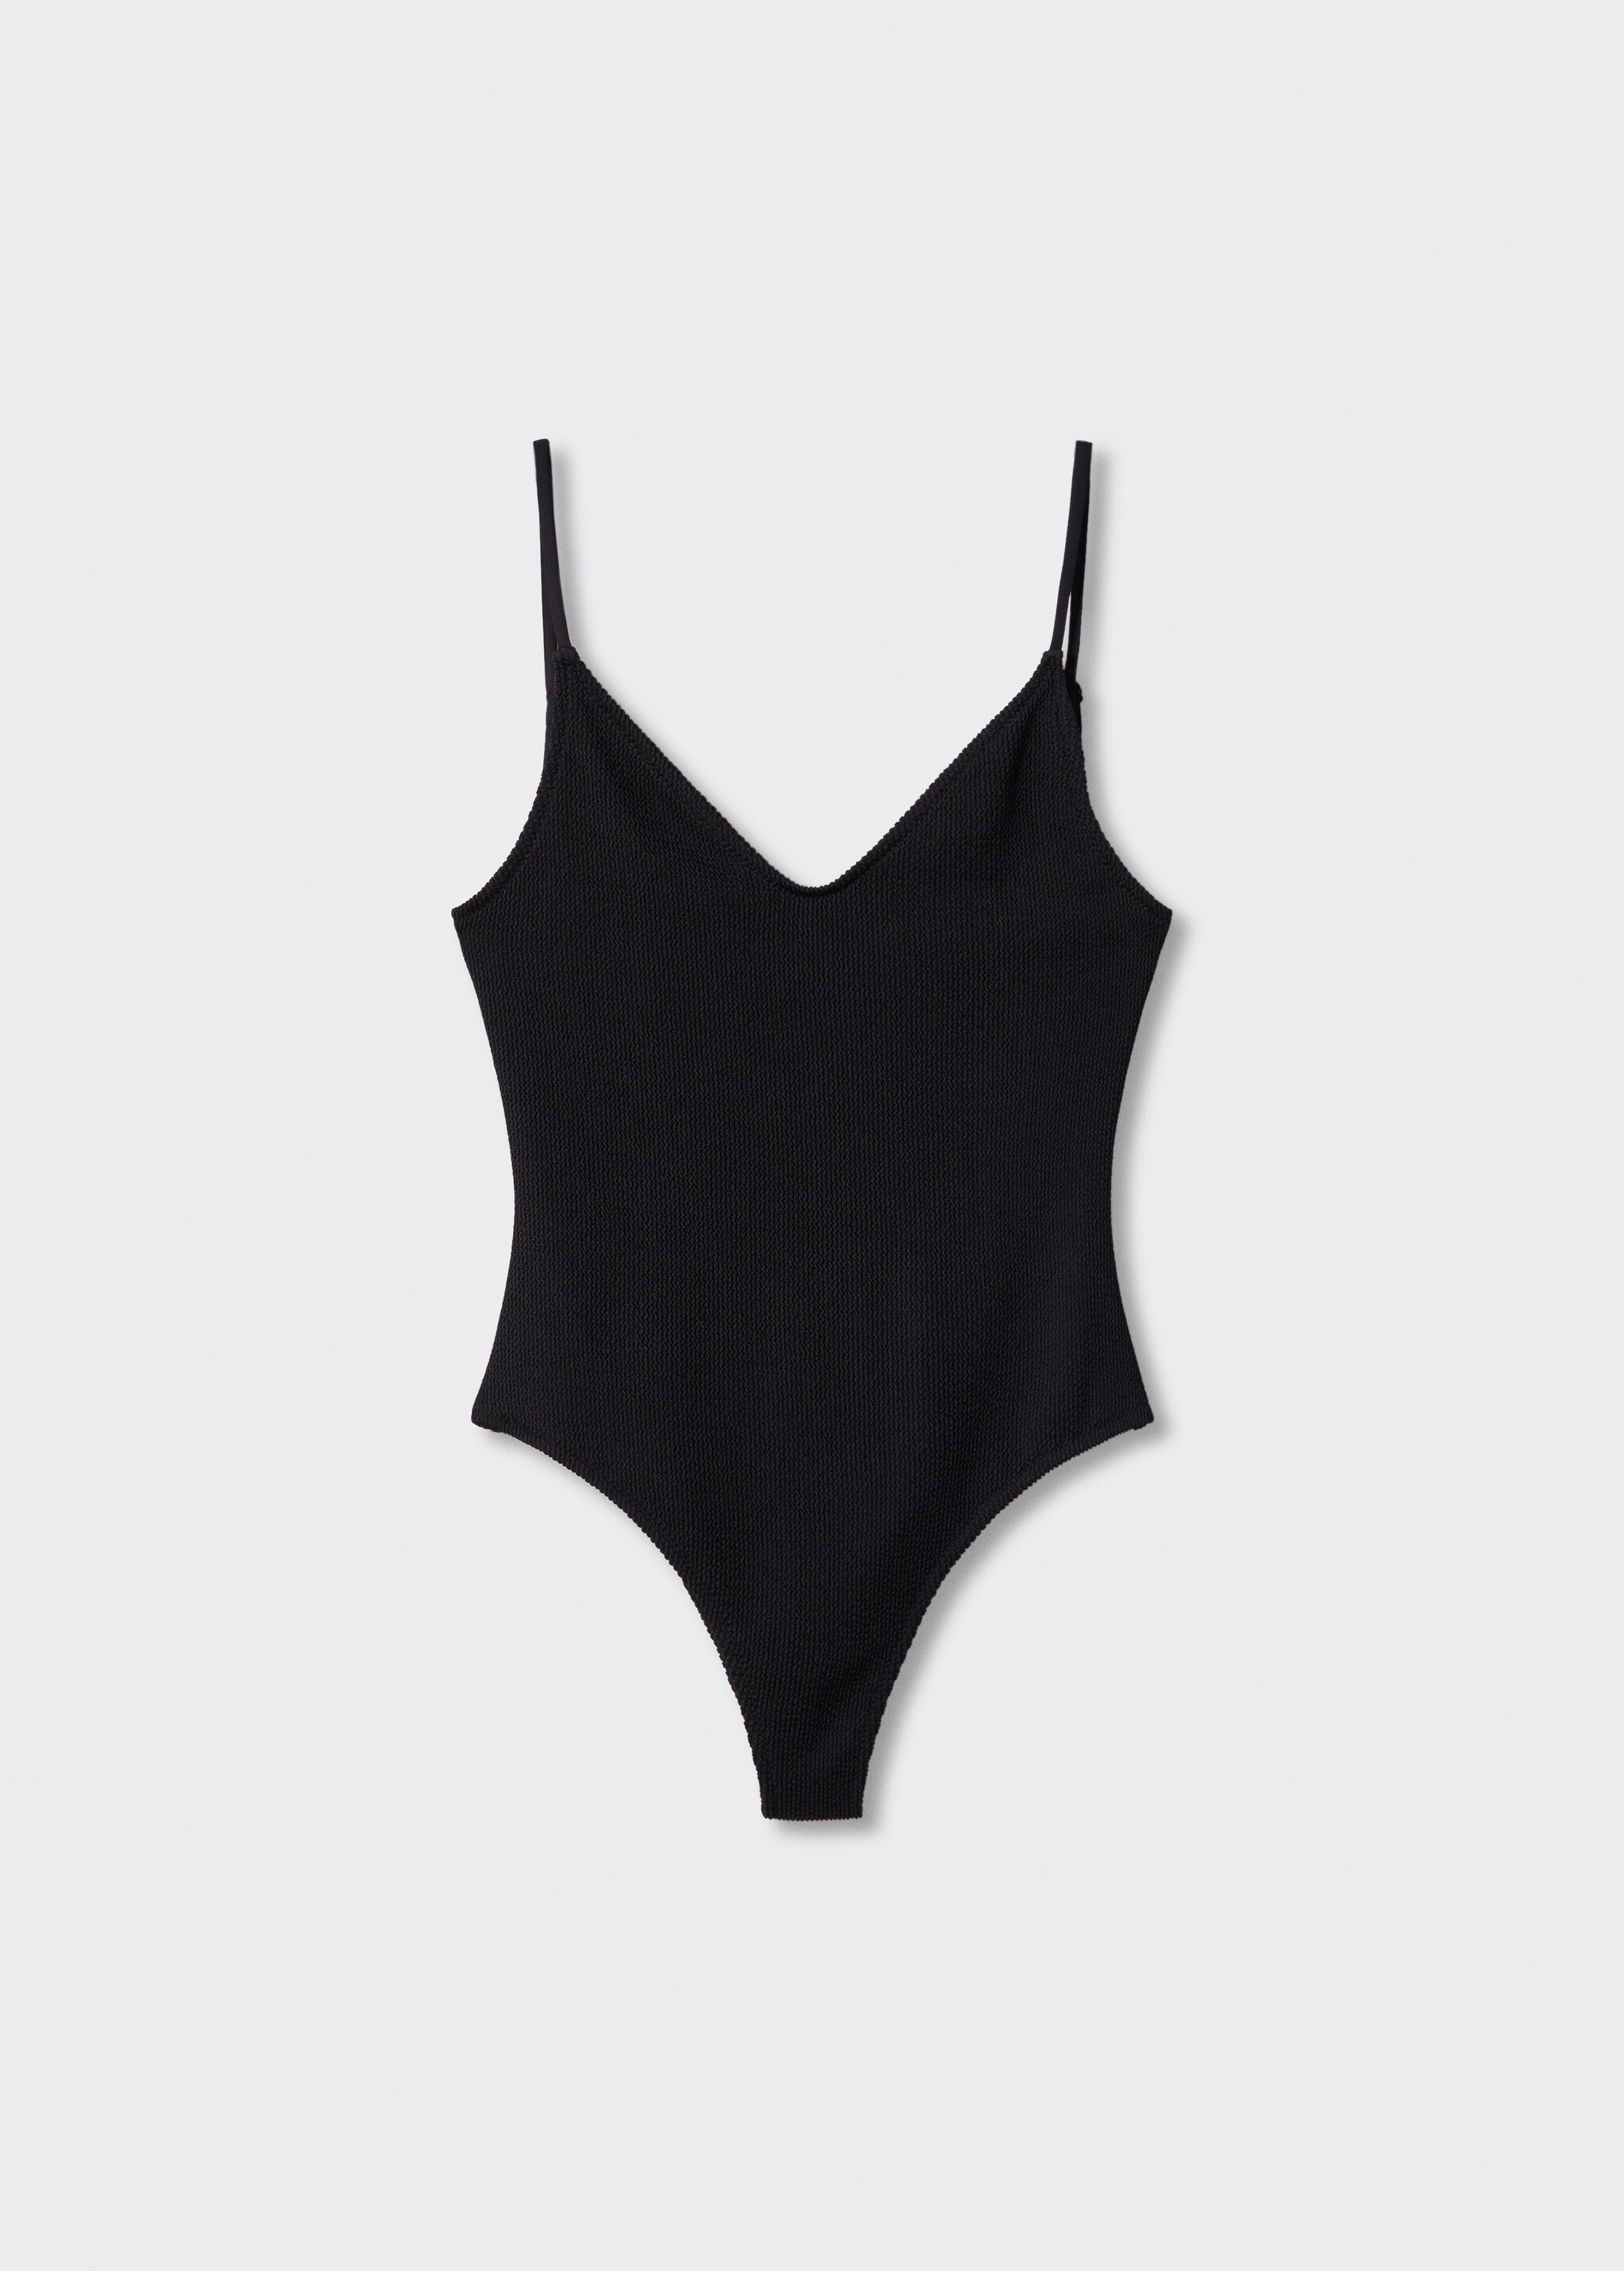 Textured swimsuit with adjustable straps - Article without model